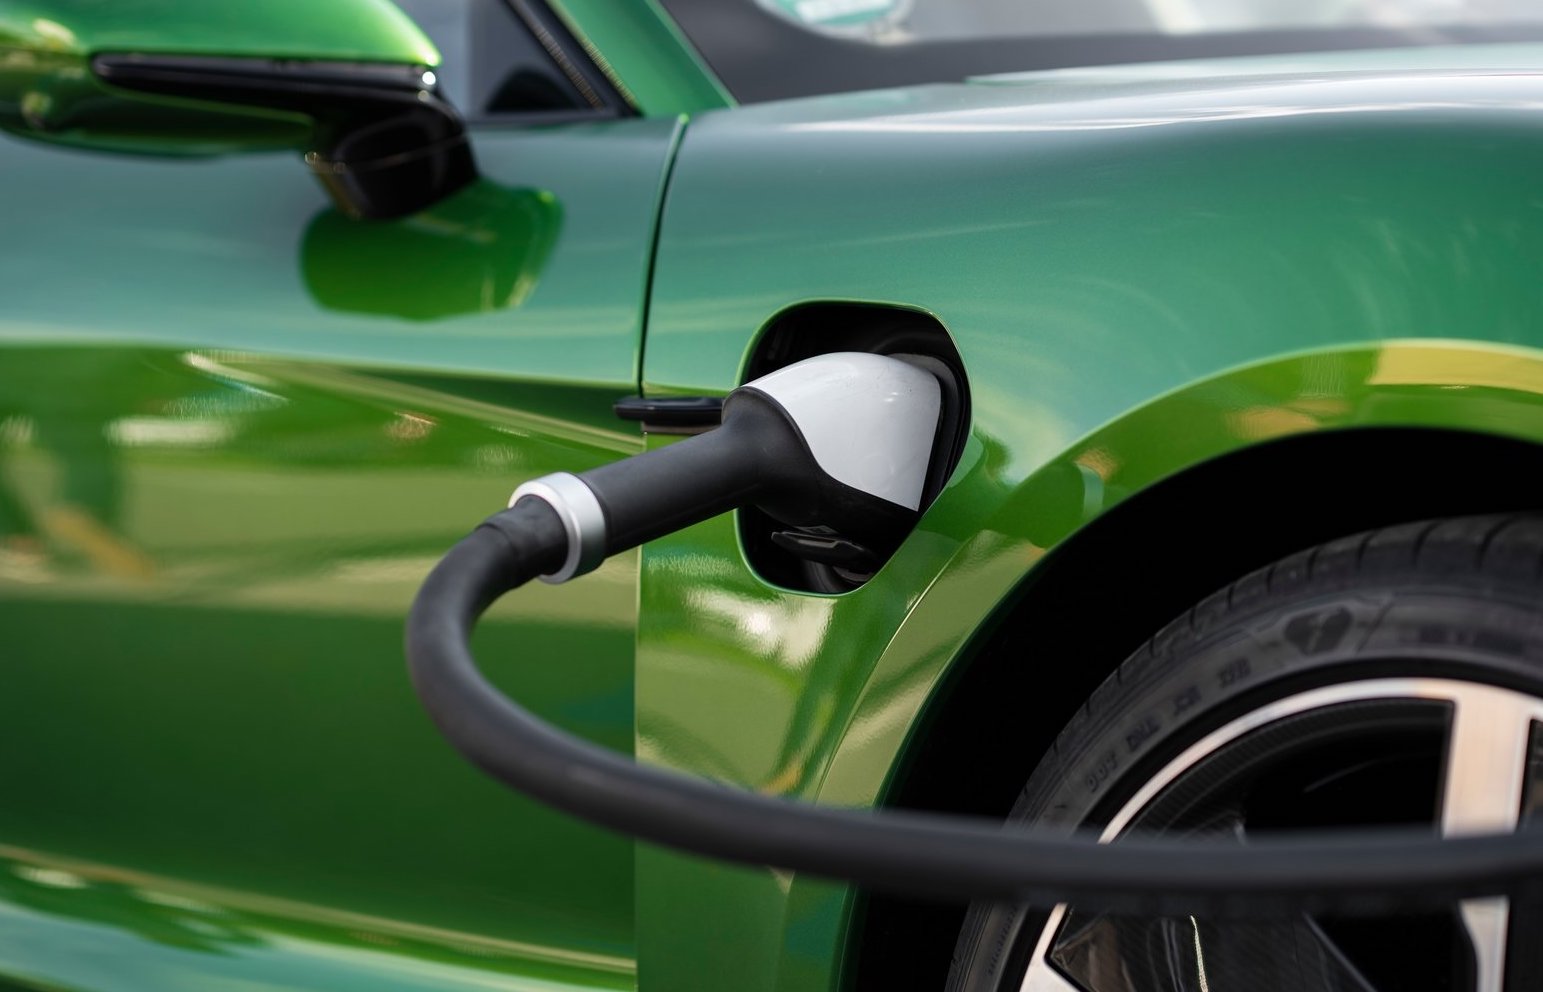 ARENA funding to see 400 new EV charging stations set up in Australia